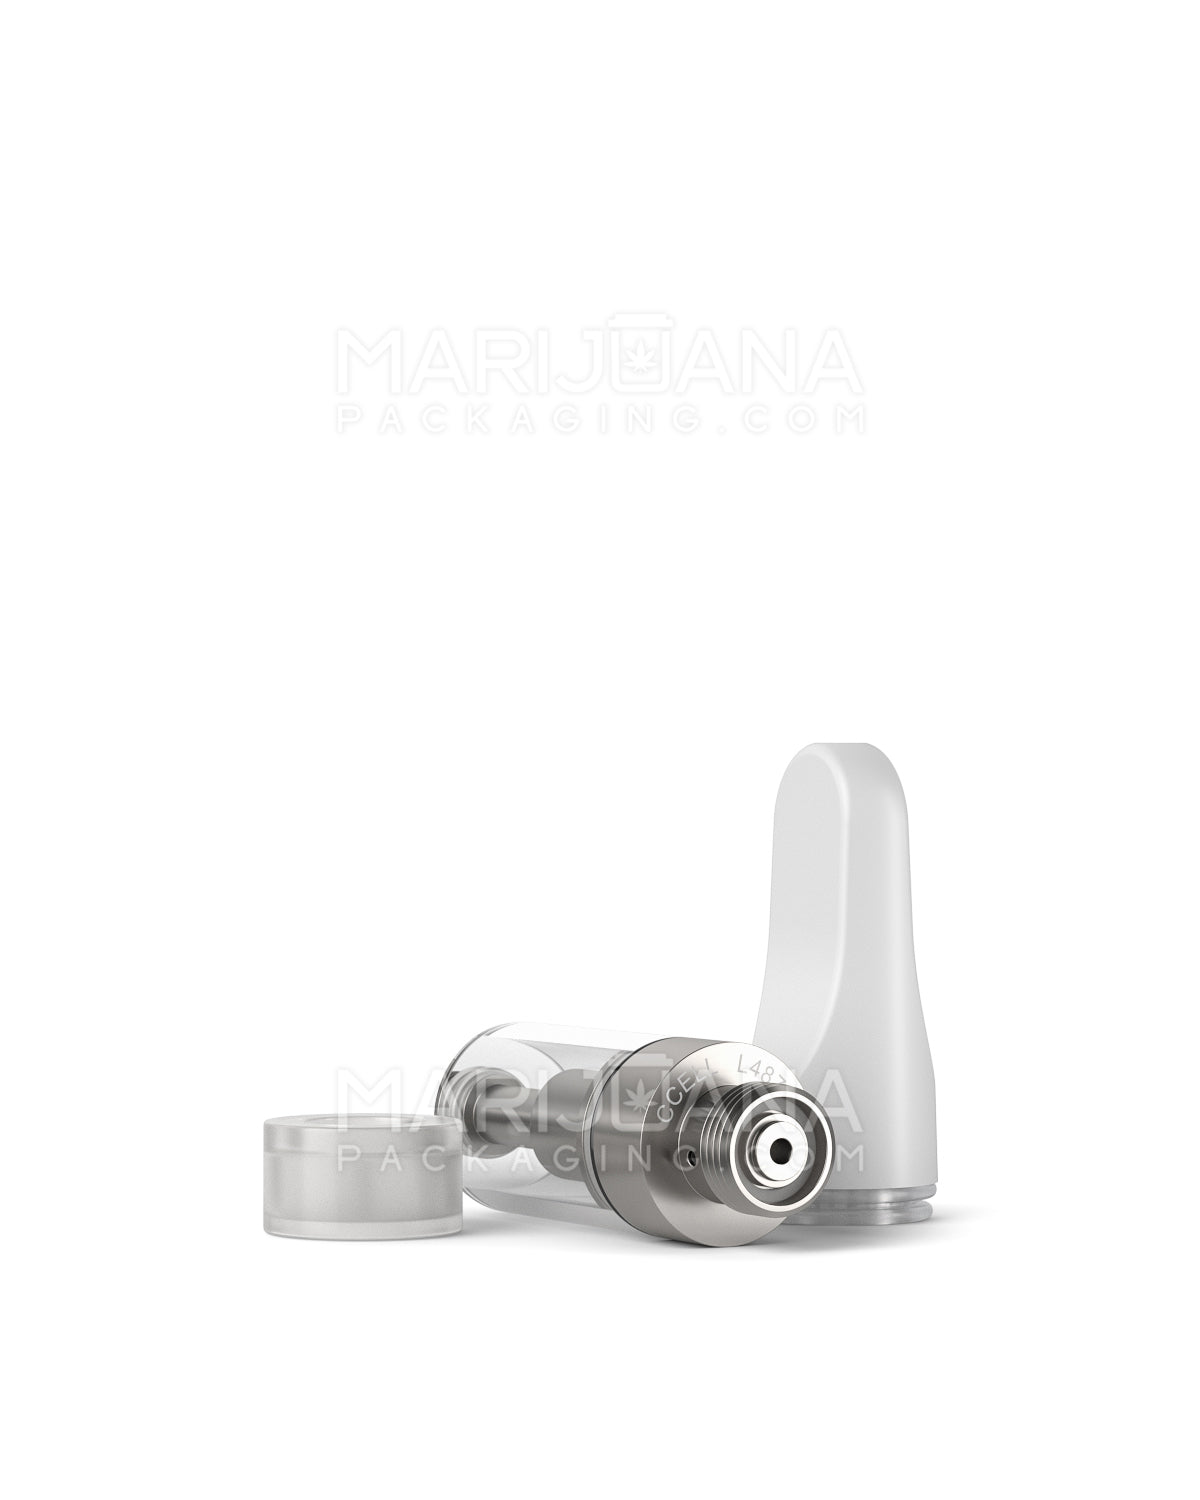 CCELL | Liquid6 Reactor Glass Vape Cartridge with White Plastic Mouthpiece | 0.5mL - Screw On - 100 Count - 8